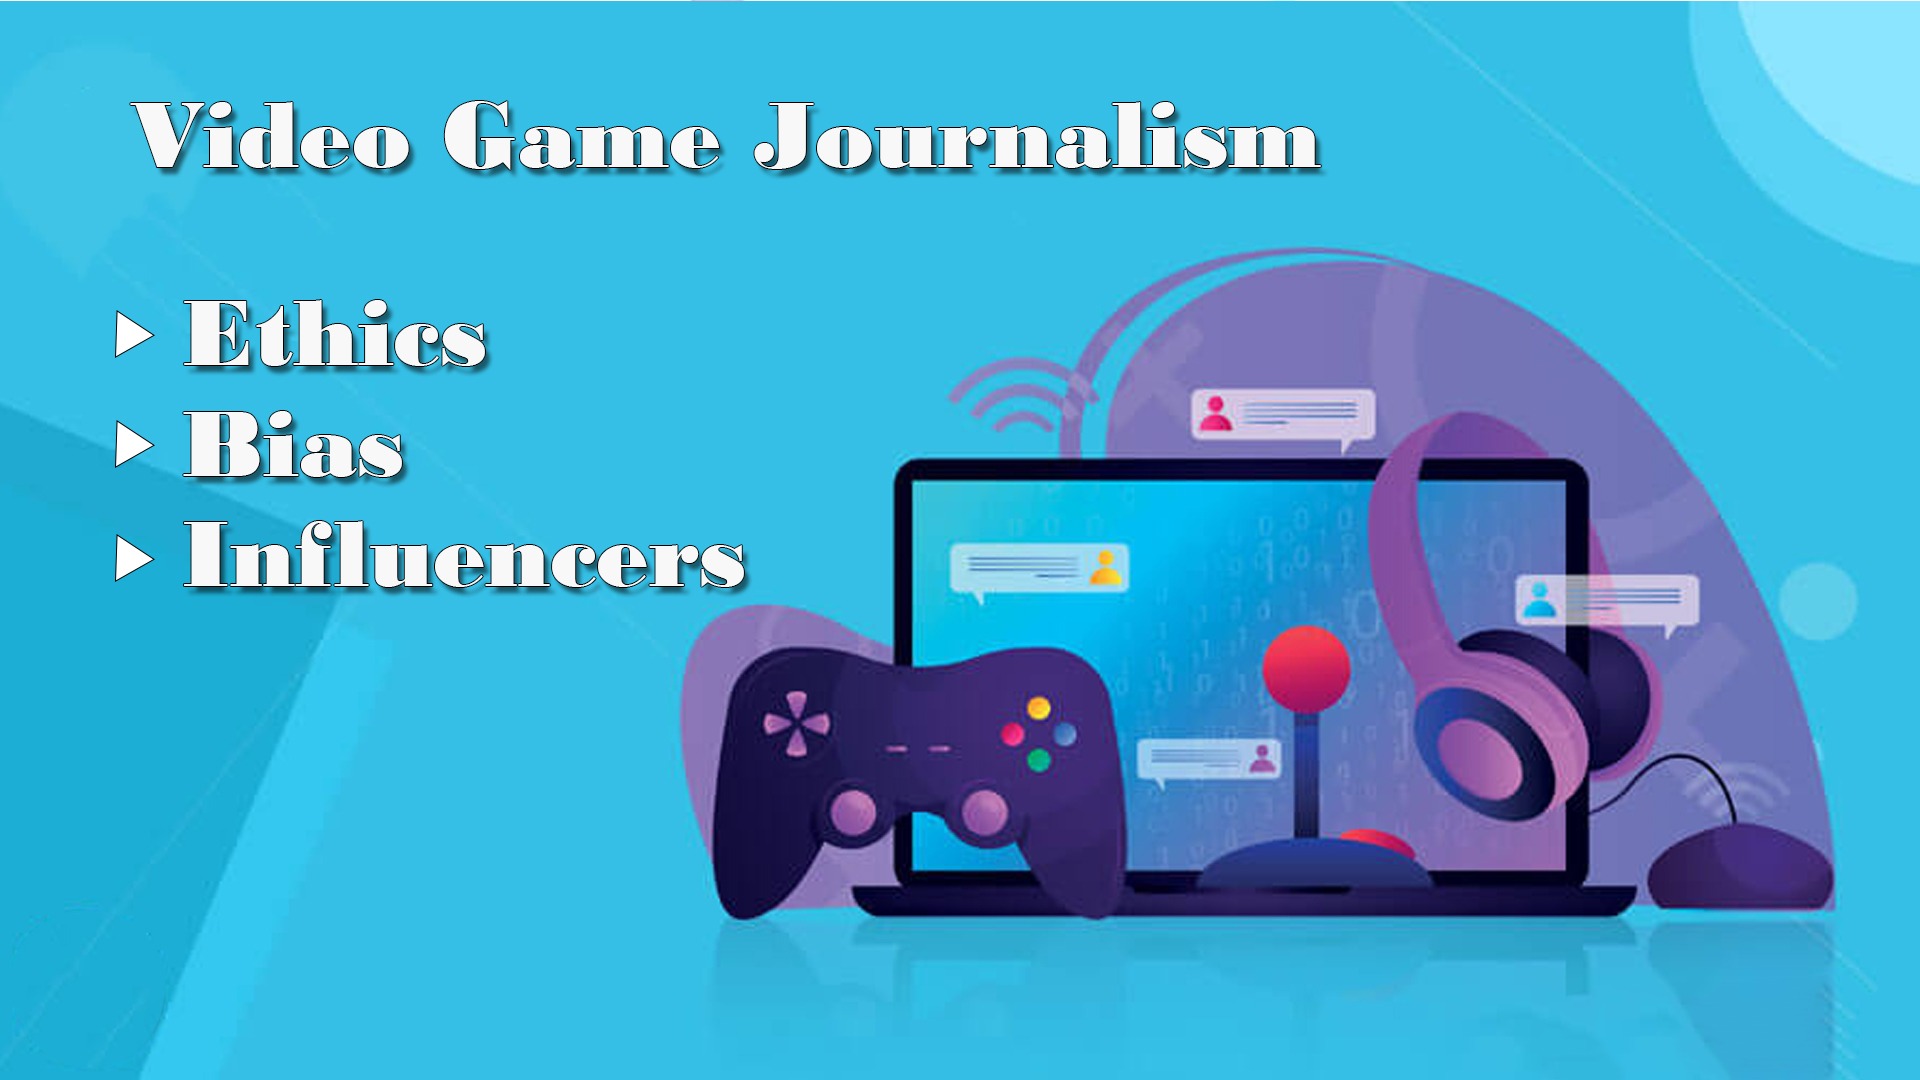 Video Game Journalism: Ethics, Bias, and Influencers